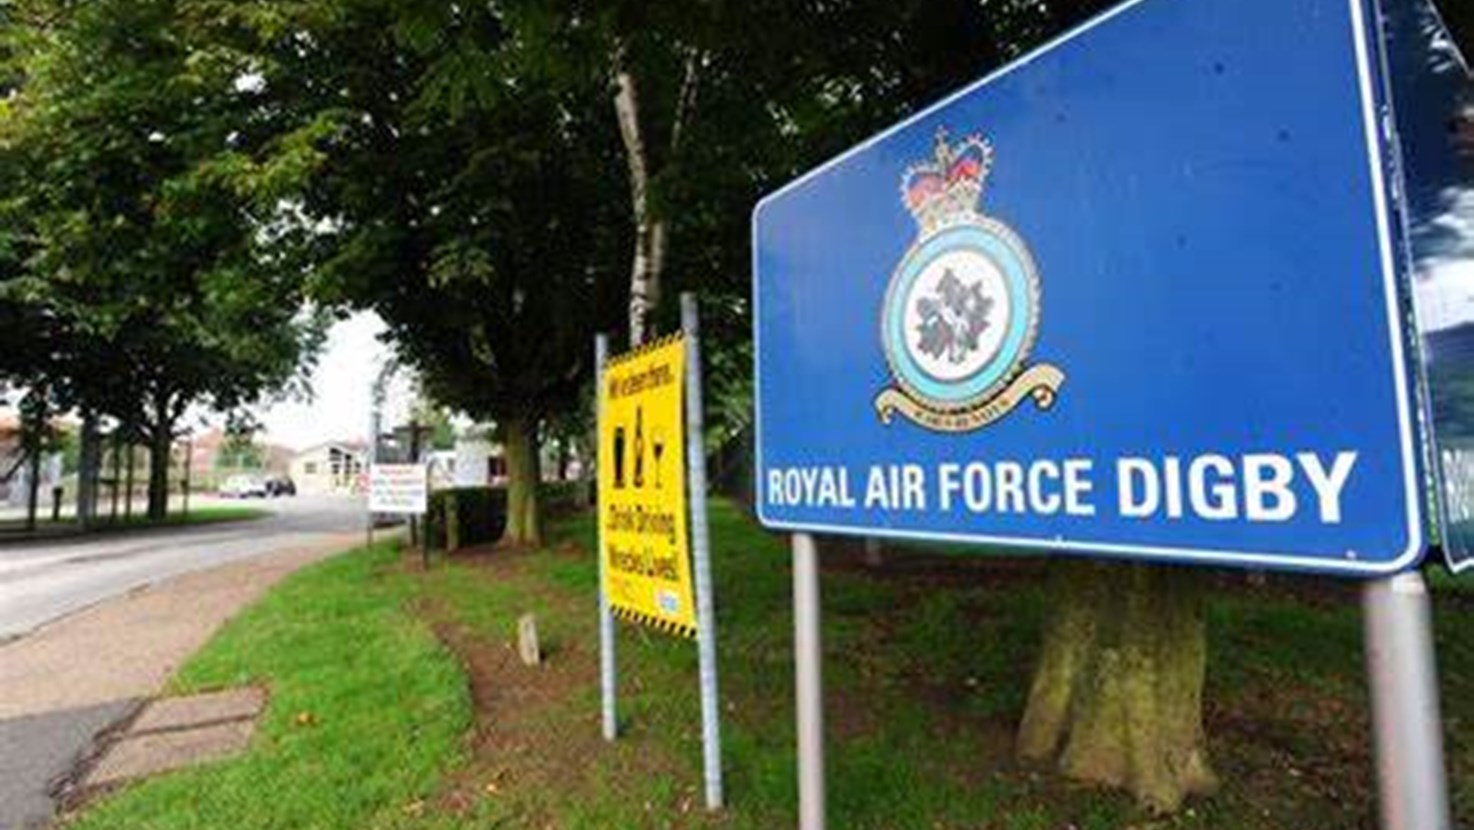 View all the events and meetings that DPCC Phil Clark attended or hosted at RAF Digby in 2023